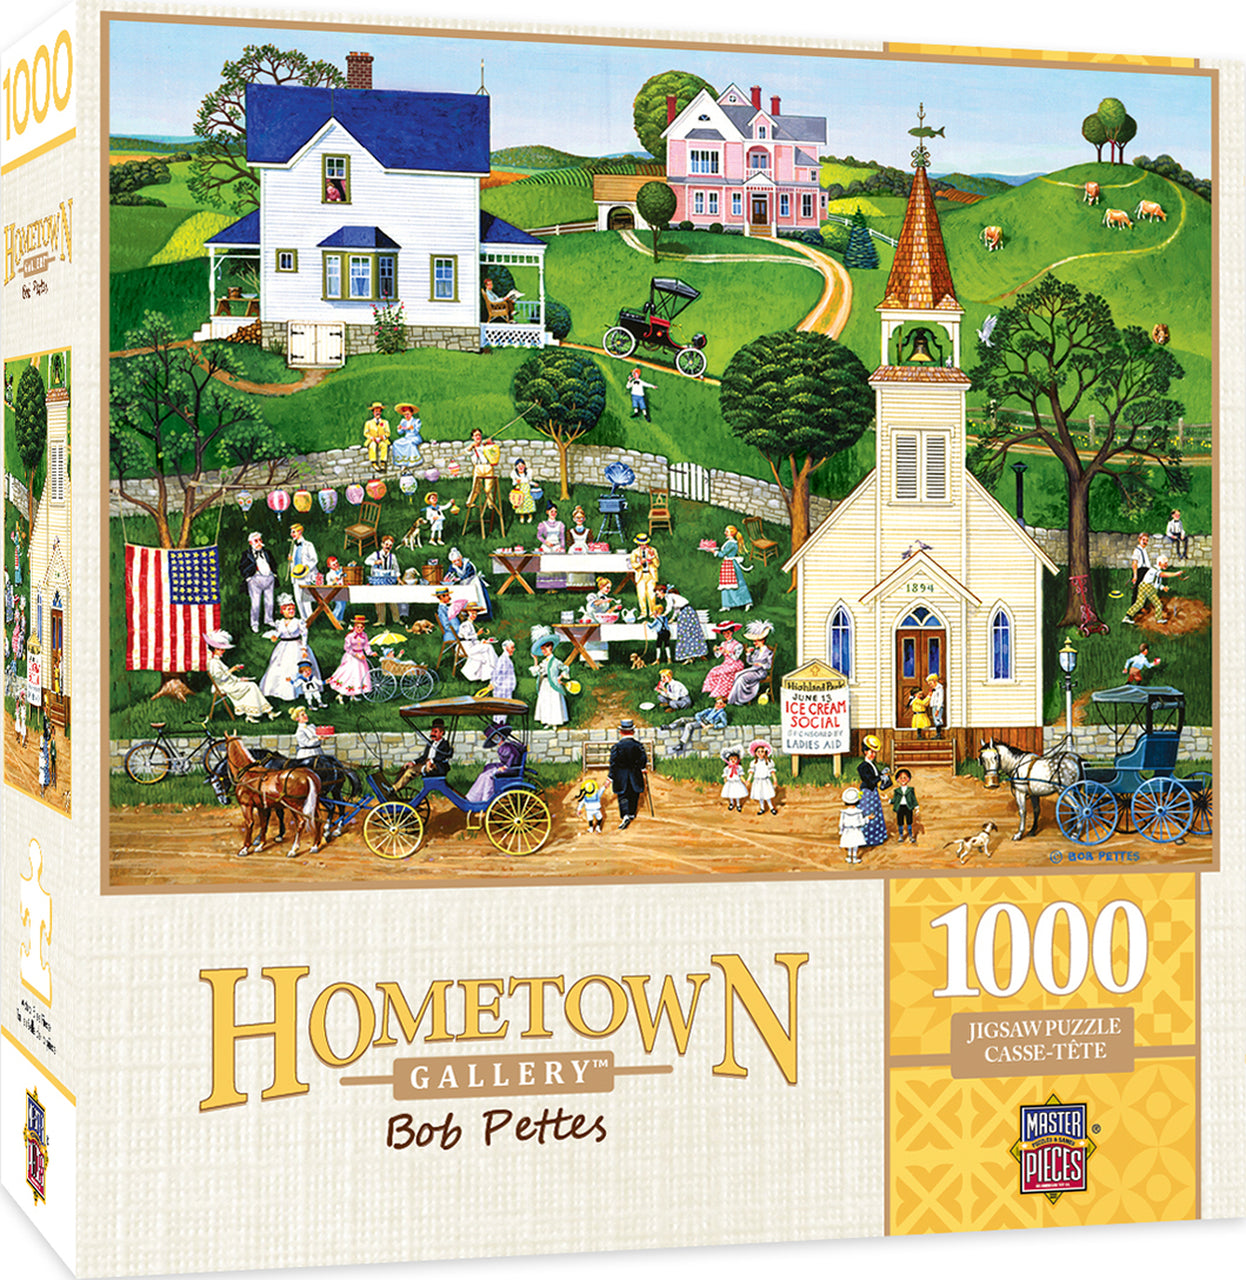 Hometown Gallery - Strawberry Sunday 1000 Piece Jigsaw Puzzle by Masterpieces